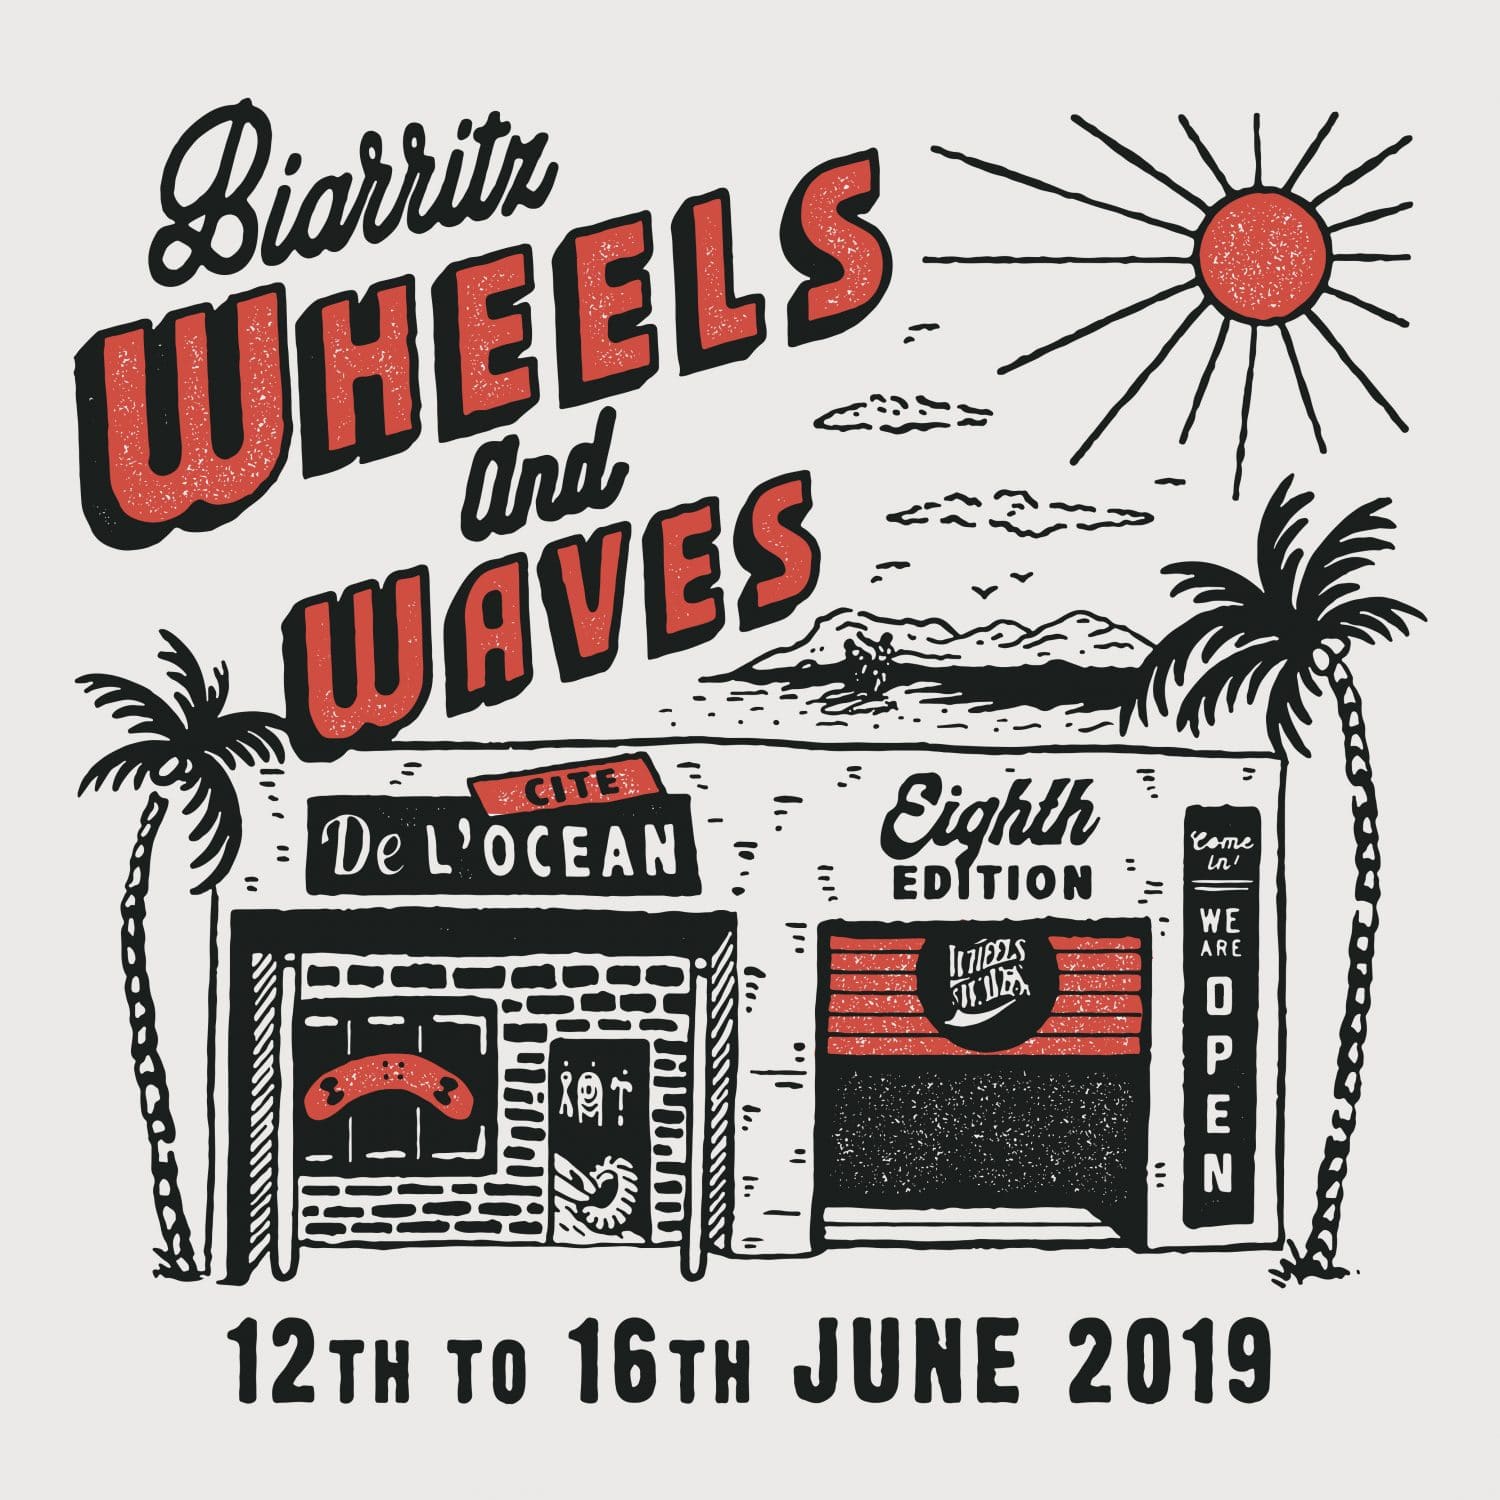 wheels-and-waves-affiche-2019-pays-basque